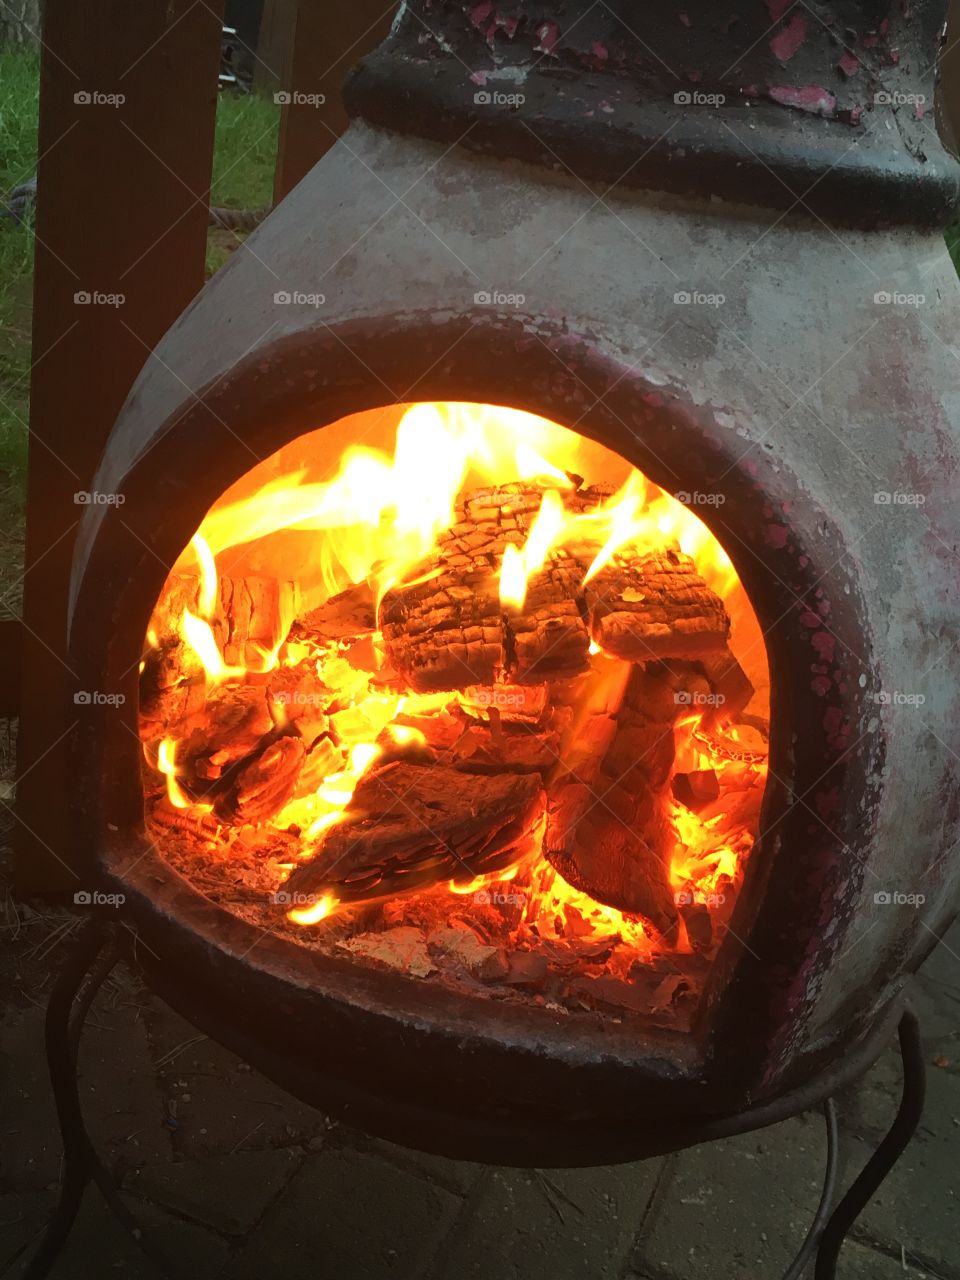 Chiminea burner with firewood logs inside burning, giving off a lot of heat in the garden 